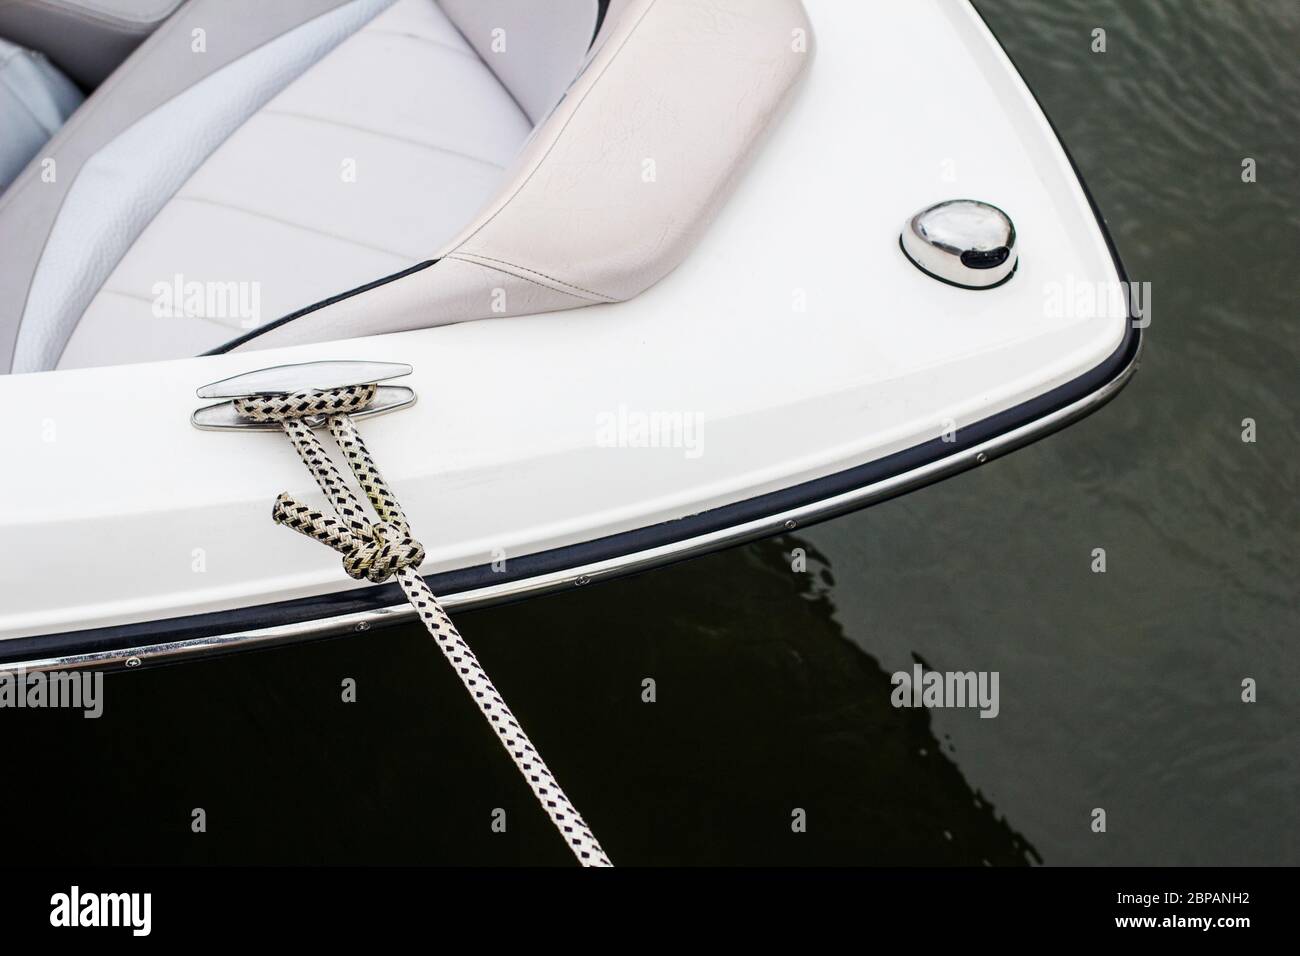 View of the bow of a moored motor boat on the dock hobby small yacht snow white luxury boat rental sports boat vacation leisure relaxation Stock Photo